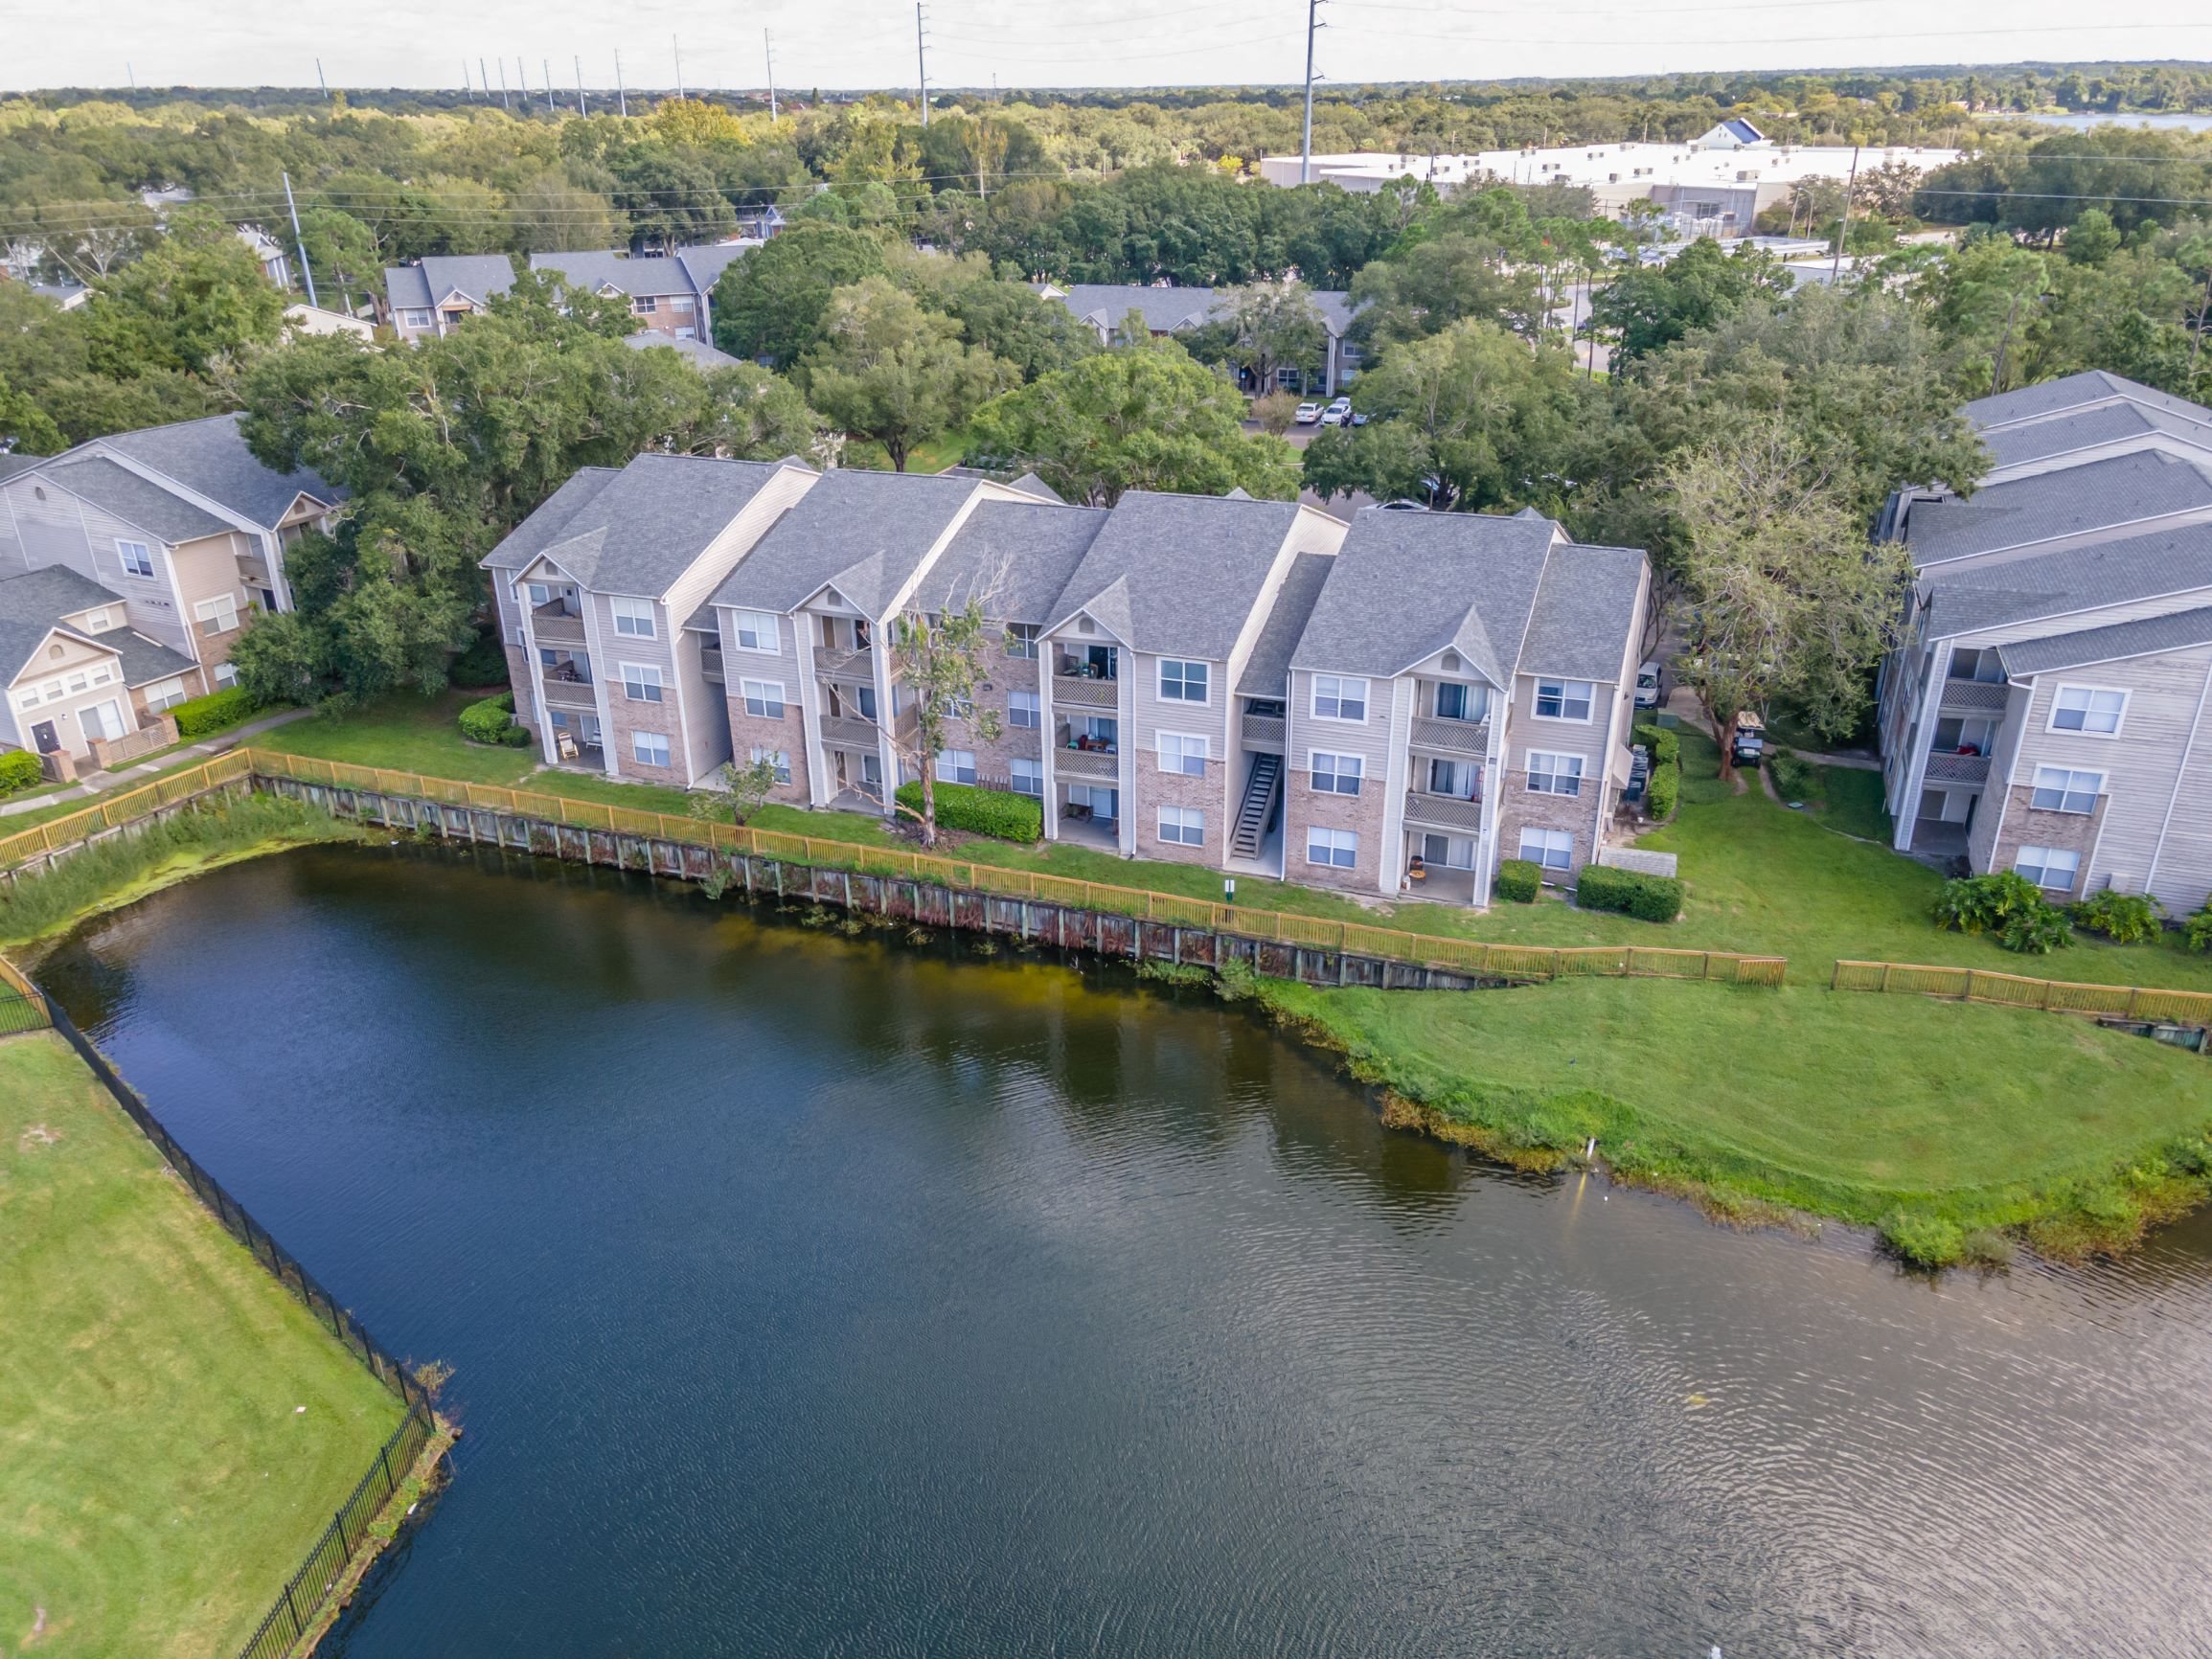 Aerial Views of Barber Park Apartments in Orlando FL